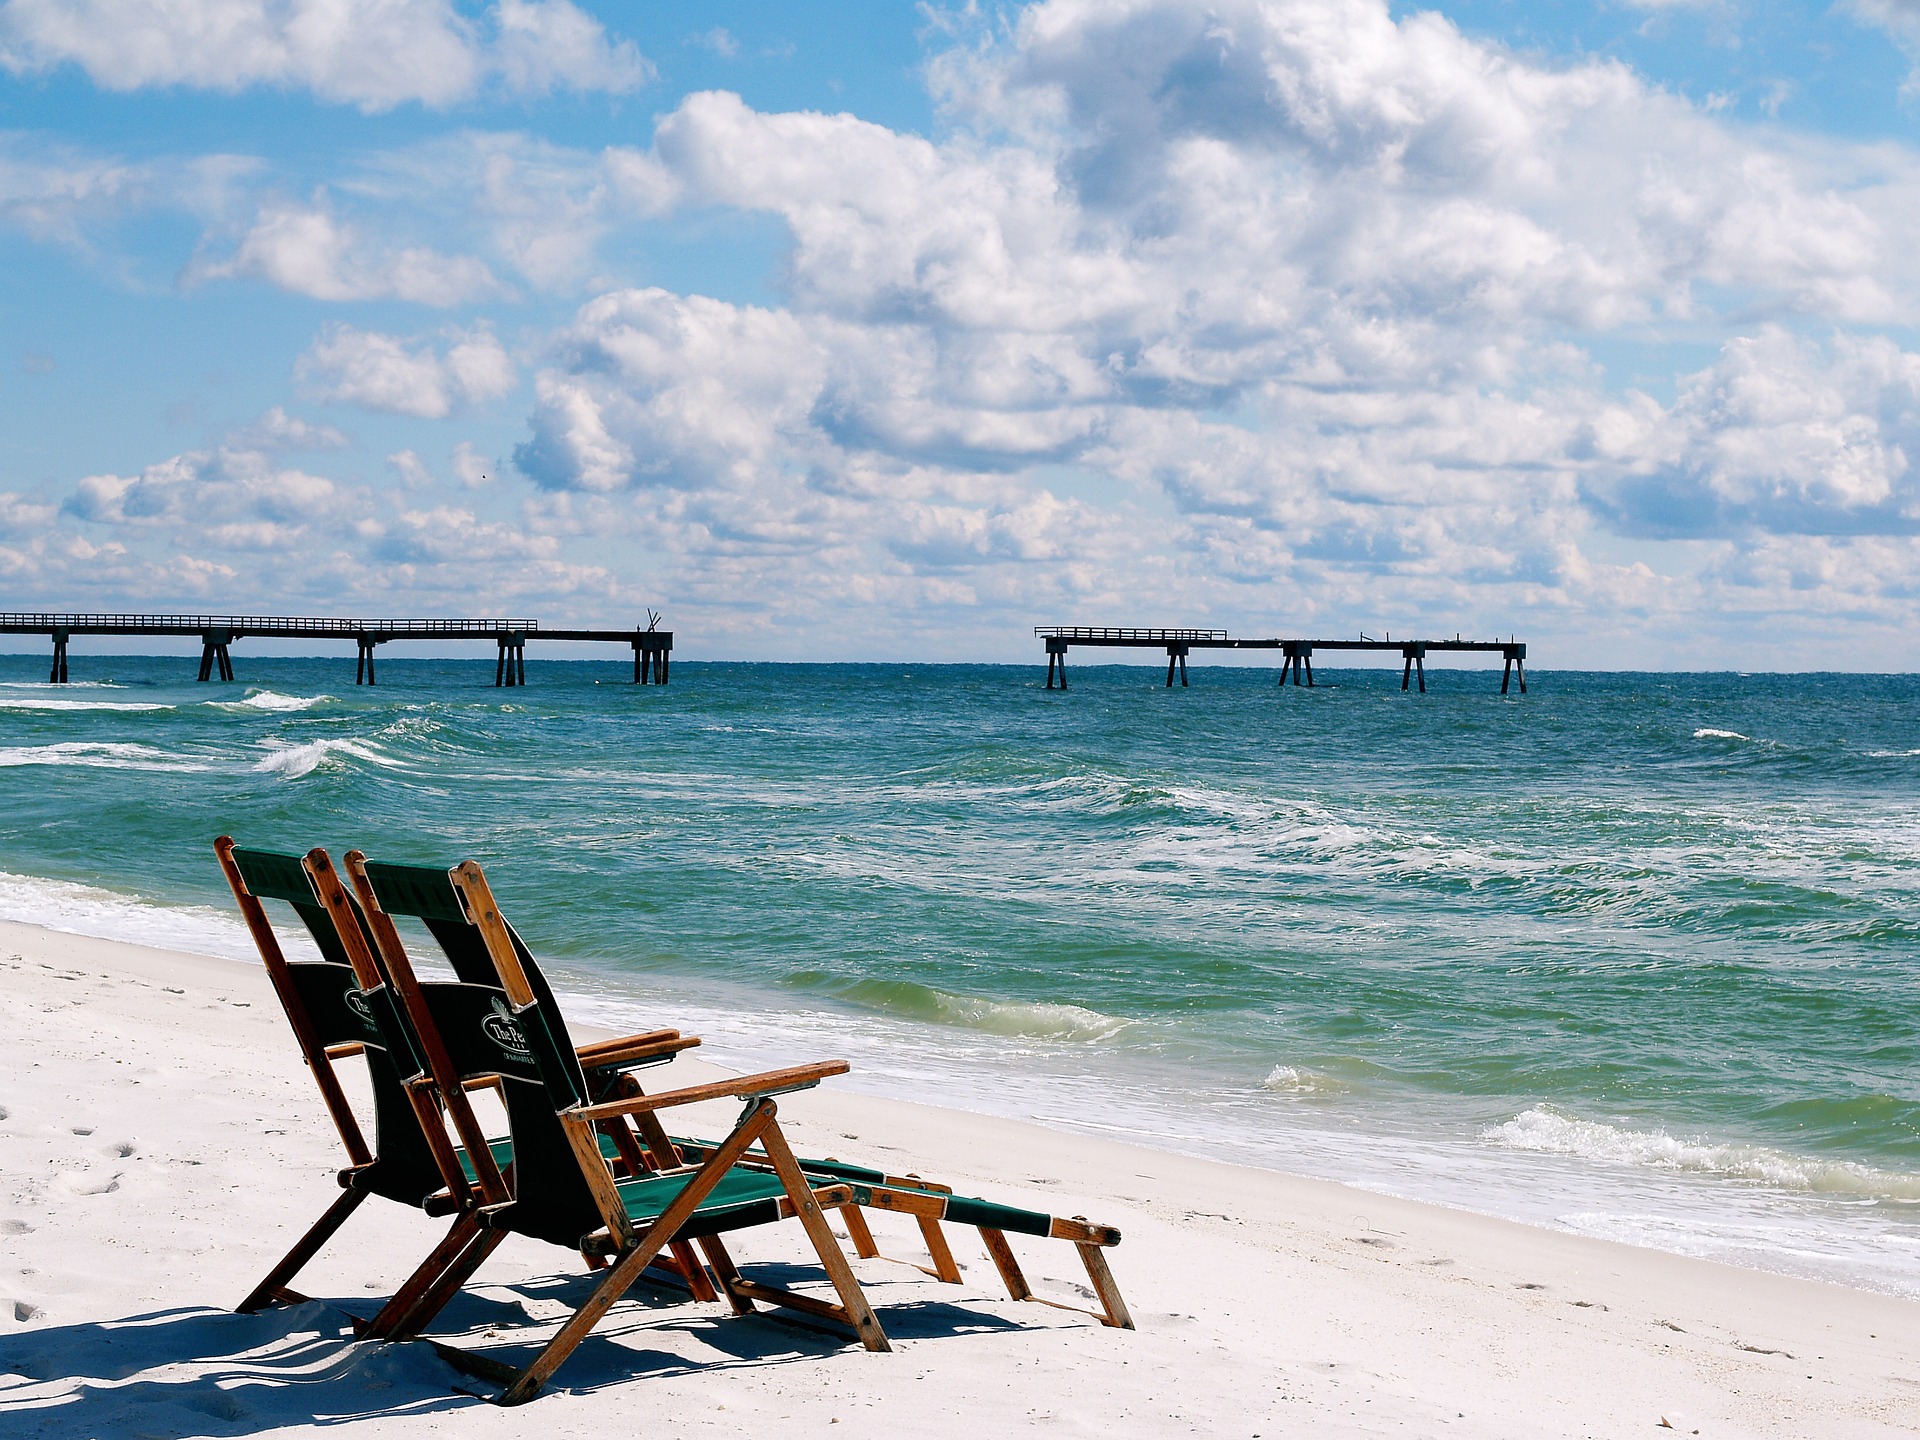 Enjoy the oceanic views of your Gulf Shores vacation